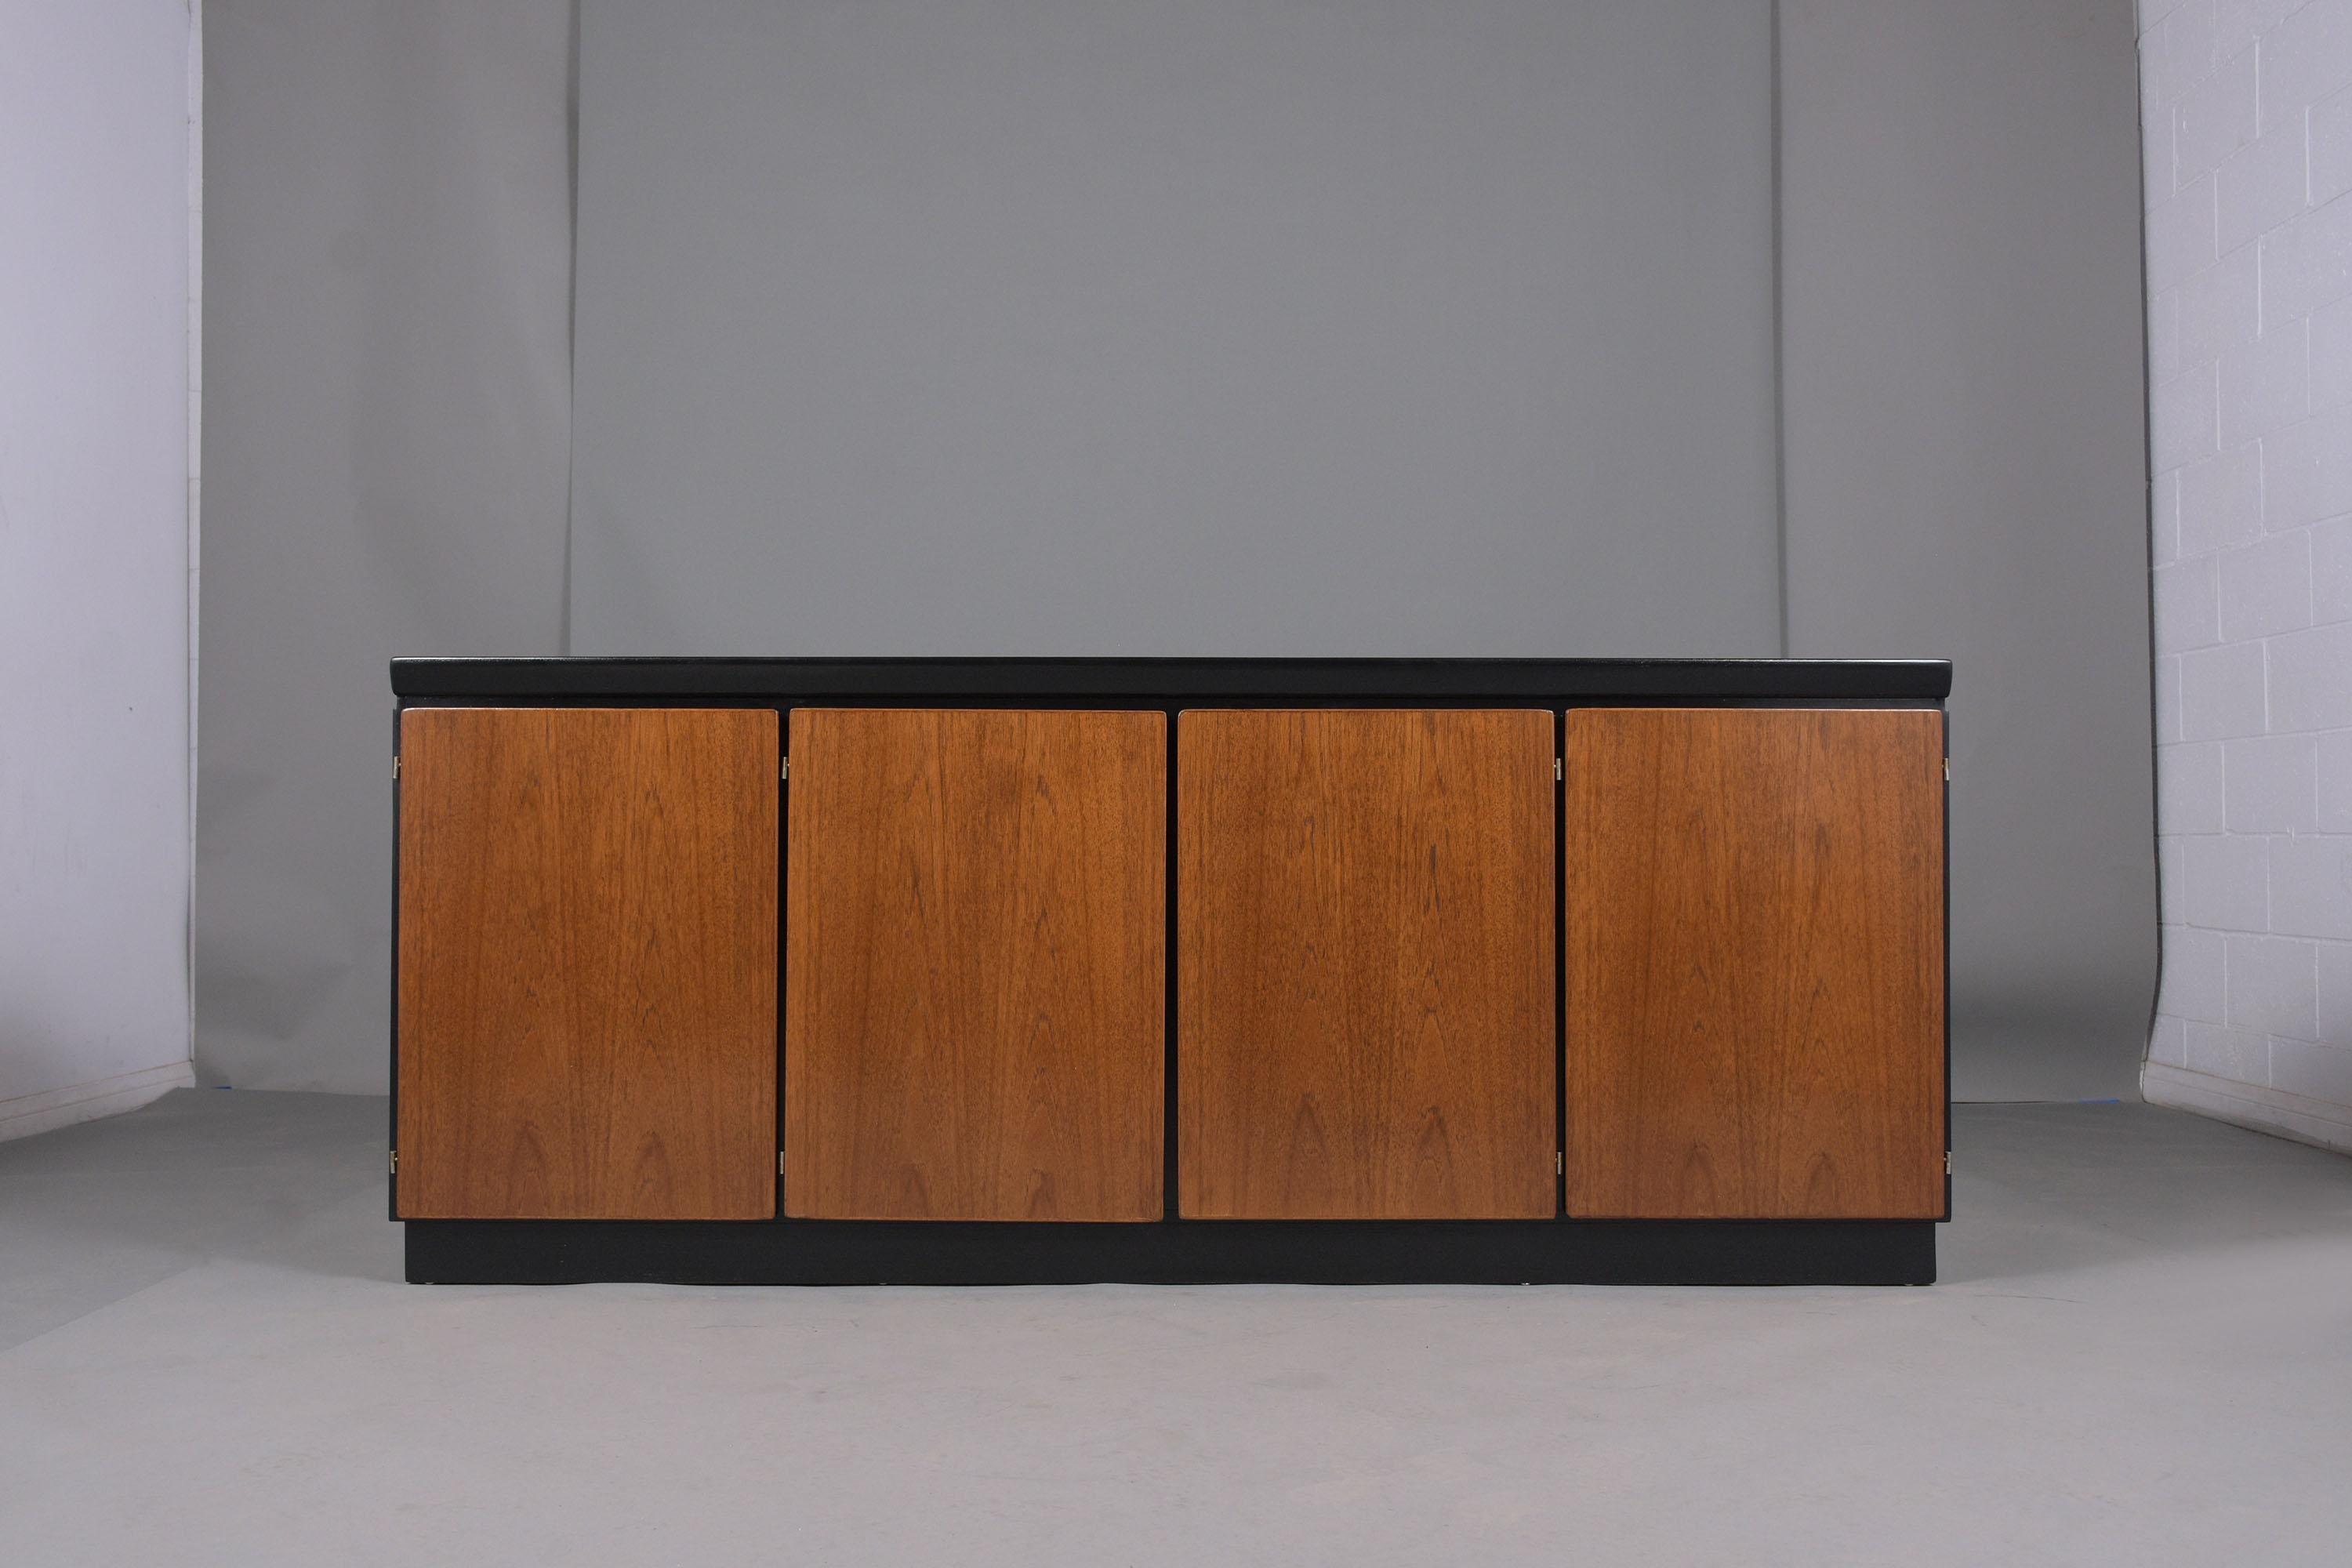 An extraordinary 1970s Skovby Møbelfabrik A/S 1 credenza handcrafted out of walnut wood stained in an elegant ebonized & walnut color and a newly lacquered finish by our professional team of in house craftsmen. This fabulous buffet has four push